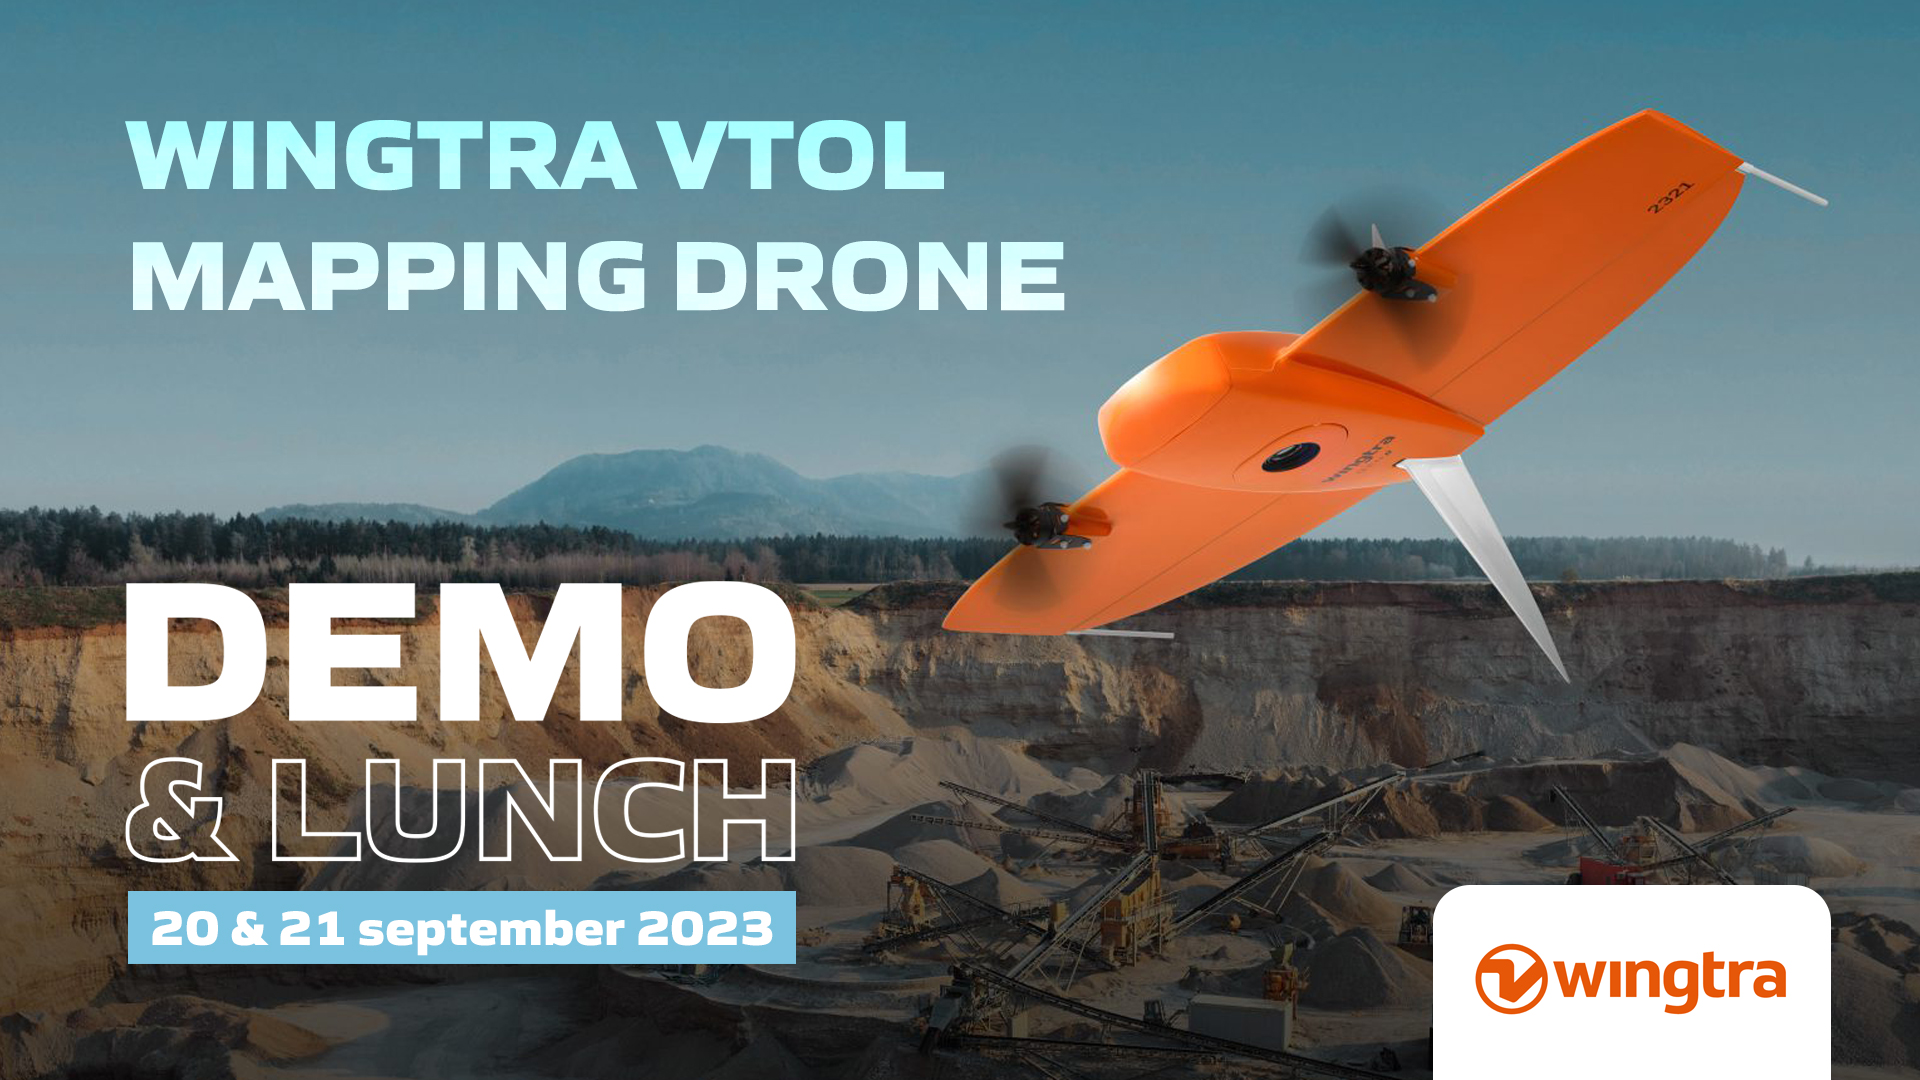 Wingtra VTOL Mapping drone